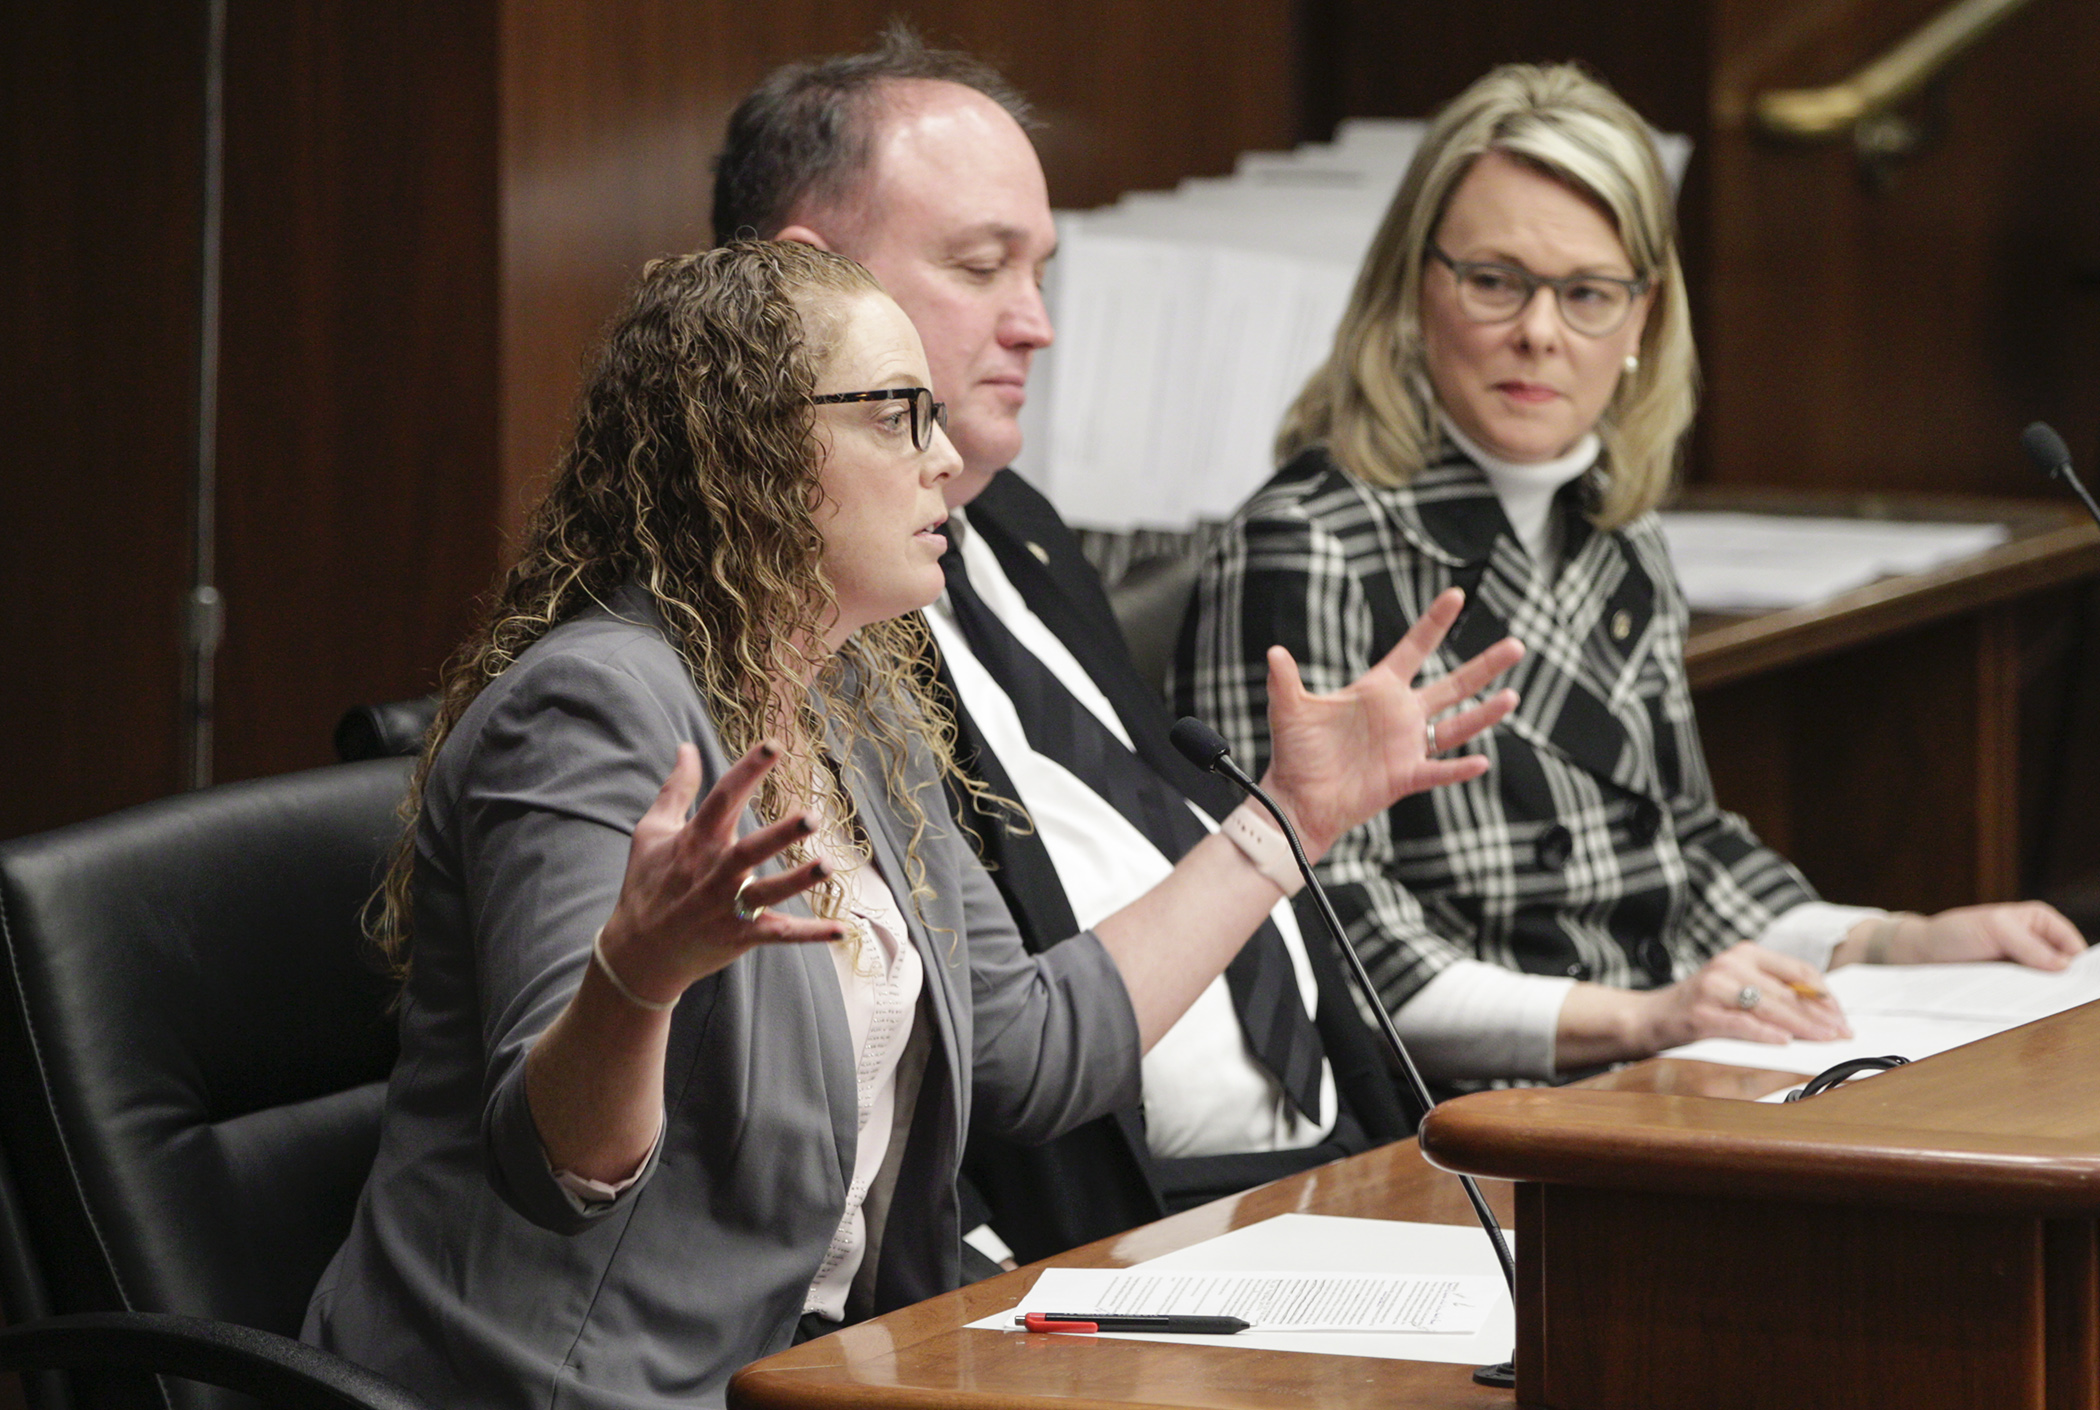 Tracey Fiereck, executive director of the Central Minnesota Educational Research and Development Council, testifies in support of a pair of bills to exempt from sales tax the sales made by school-associated student groups. Photo by Paul Battaglia